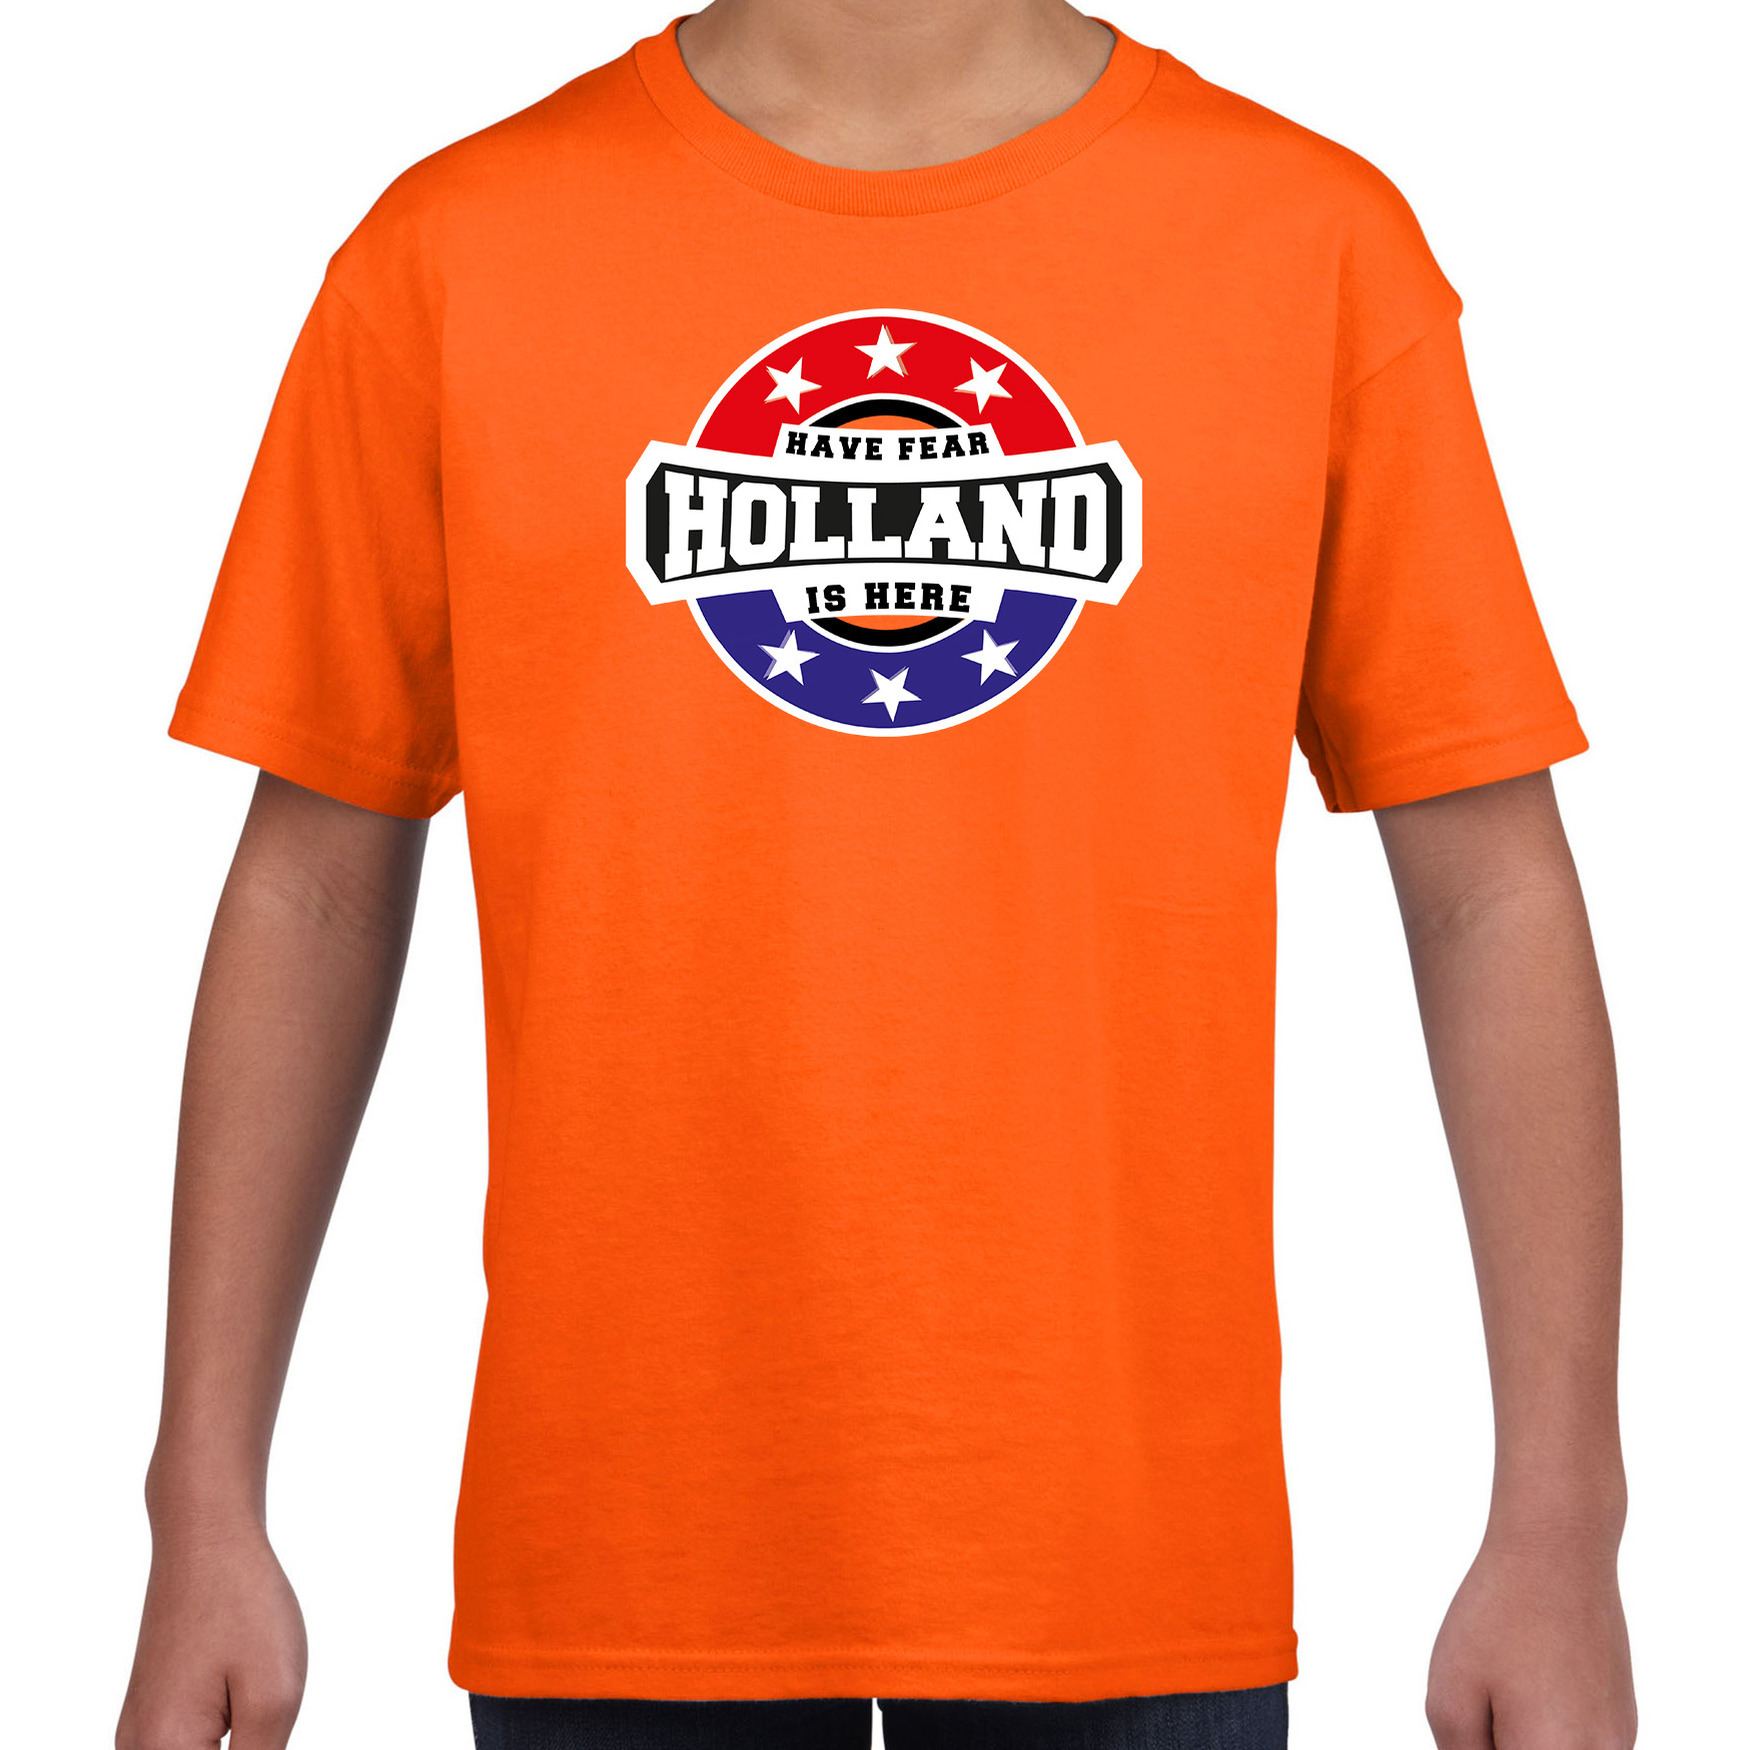 Have fear Holland is here / Holland supporter t-shirt oranje voor kids